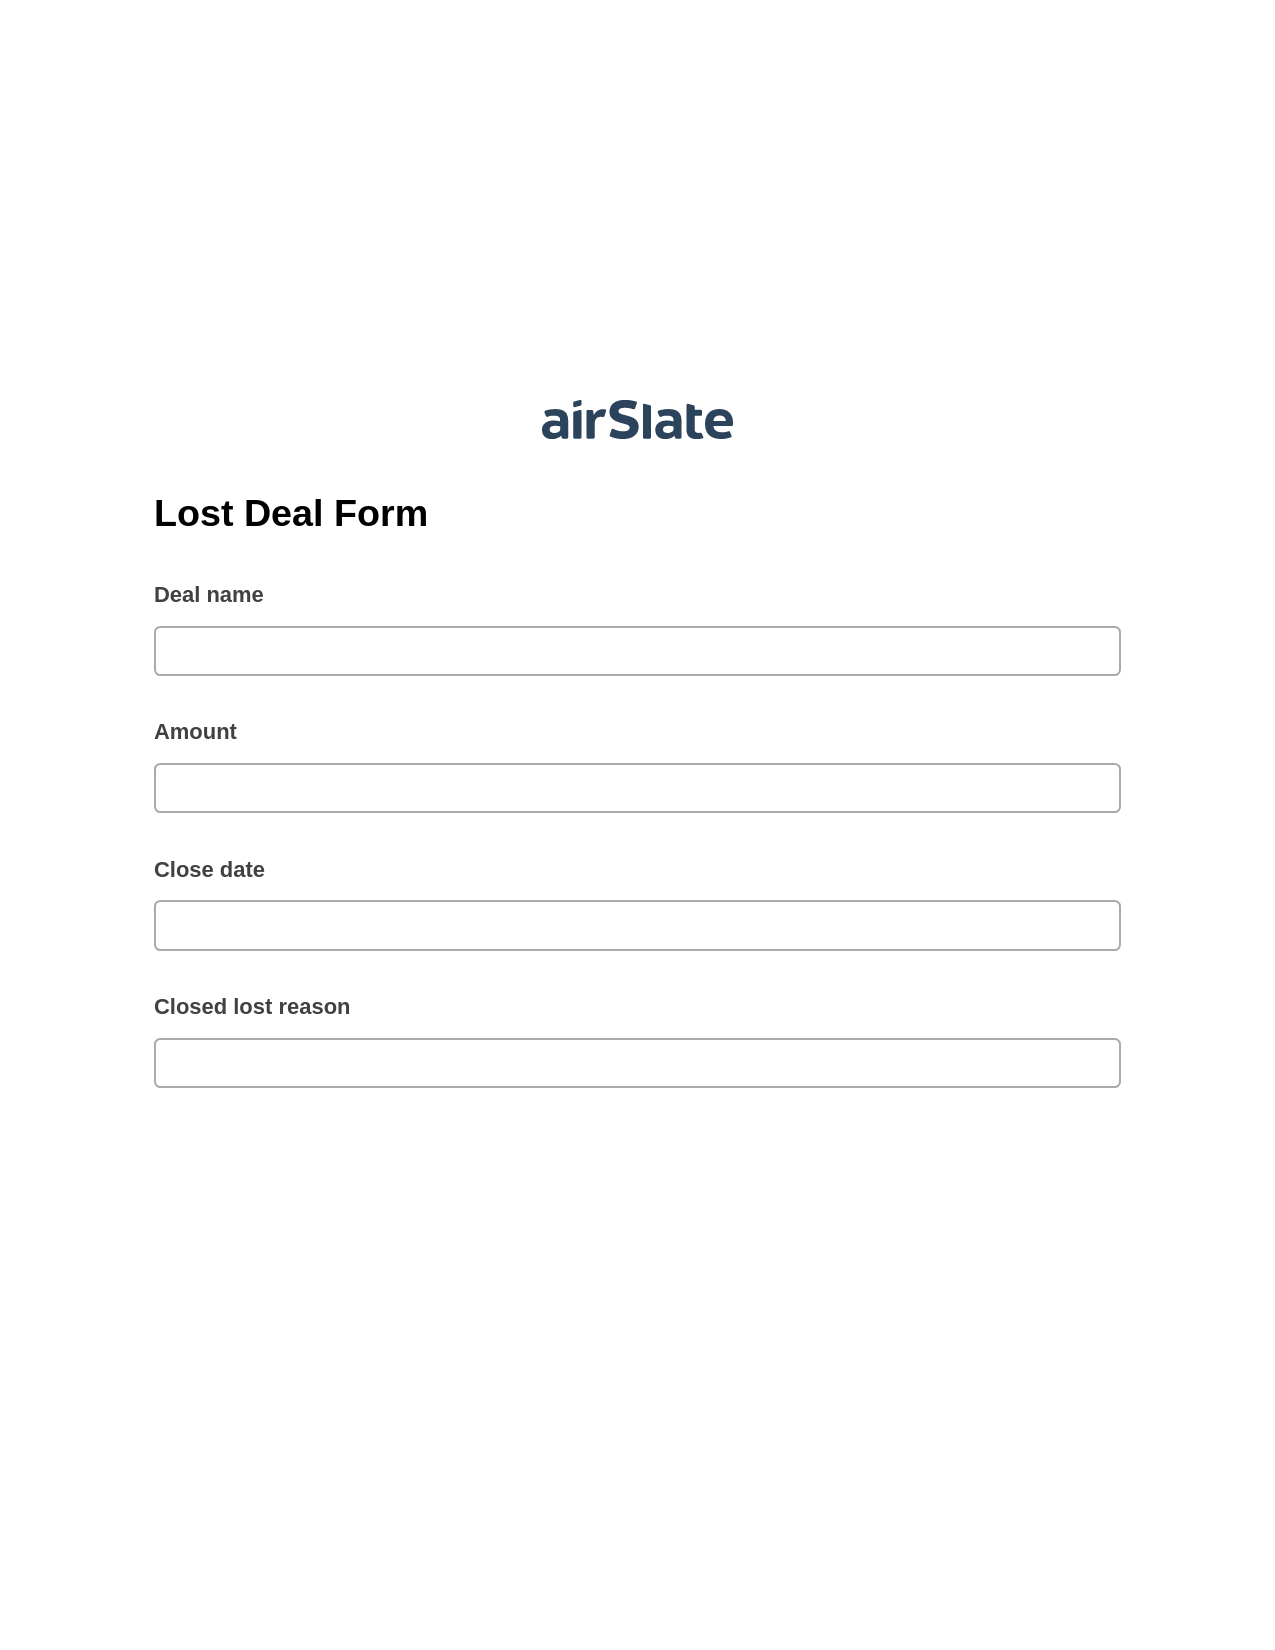 Lost Deal Form Pre-fill from MS Dynamics 365 Records, Update Salesforce Records Bot, Export to Excel 365 Bot